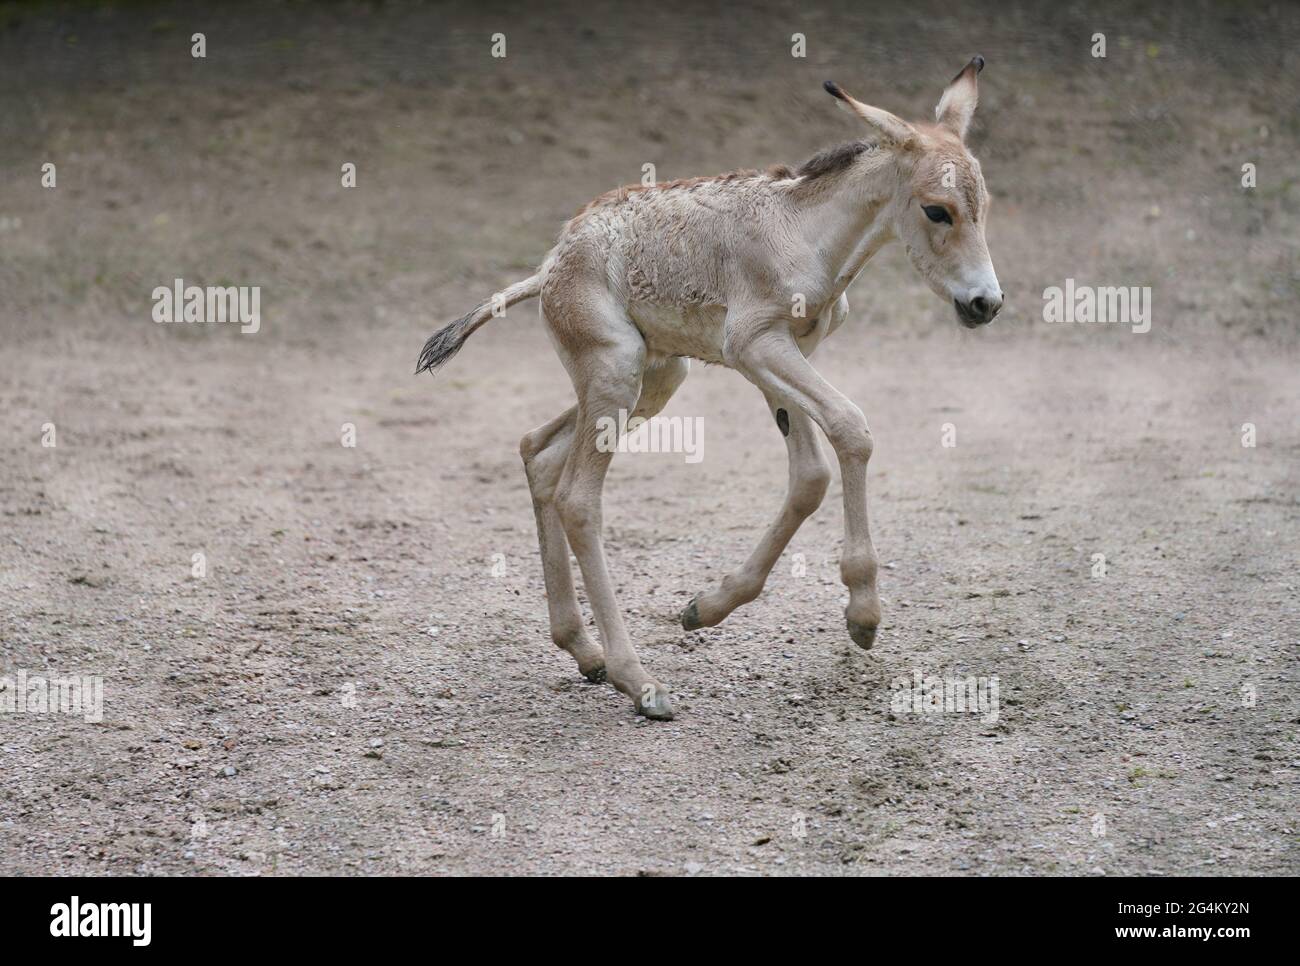 Hamburg, Germany. 22nd June, 2021. A one-day-old onager foal runs through the enclosure at Hagenbeck Zoo. Credit: Marcus Brandt/dpa/Alamy Live News Stock Photo